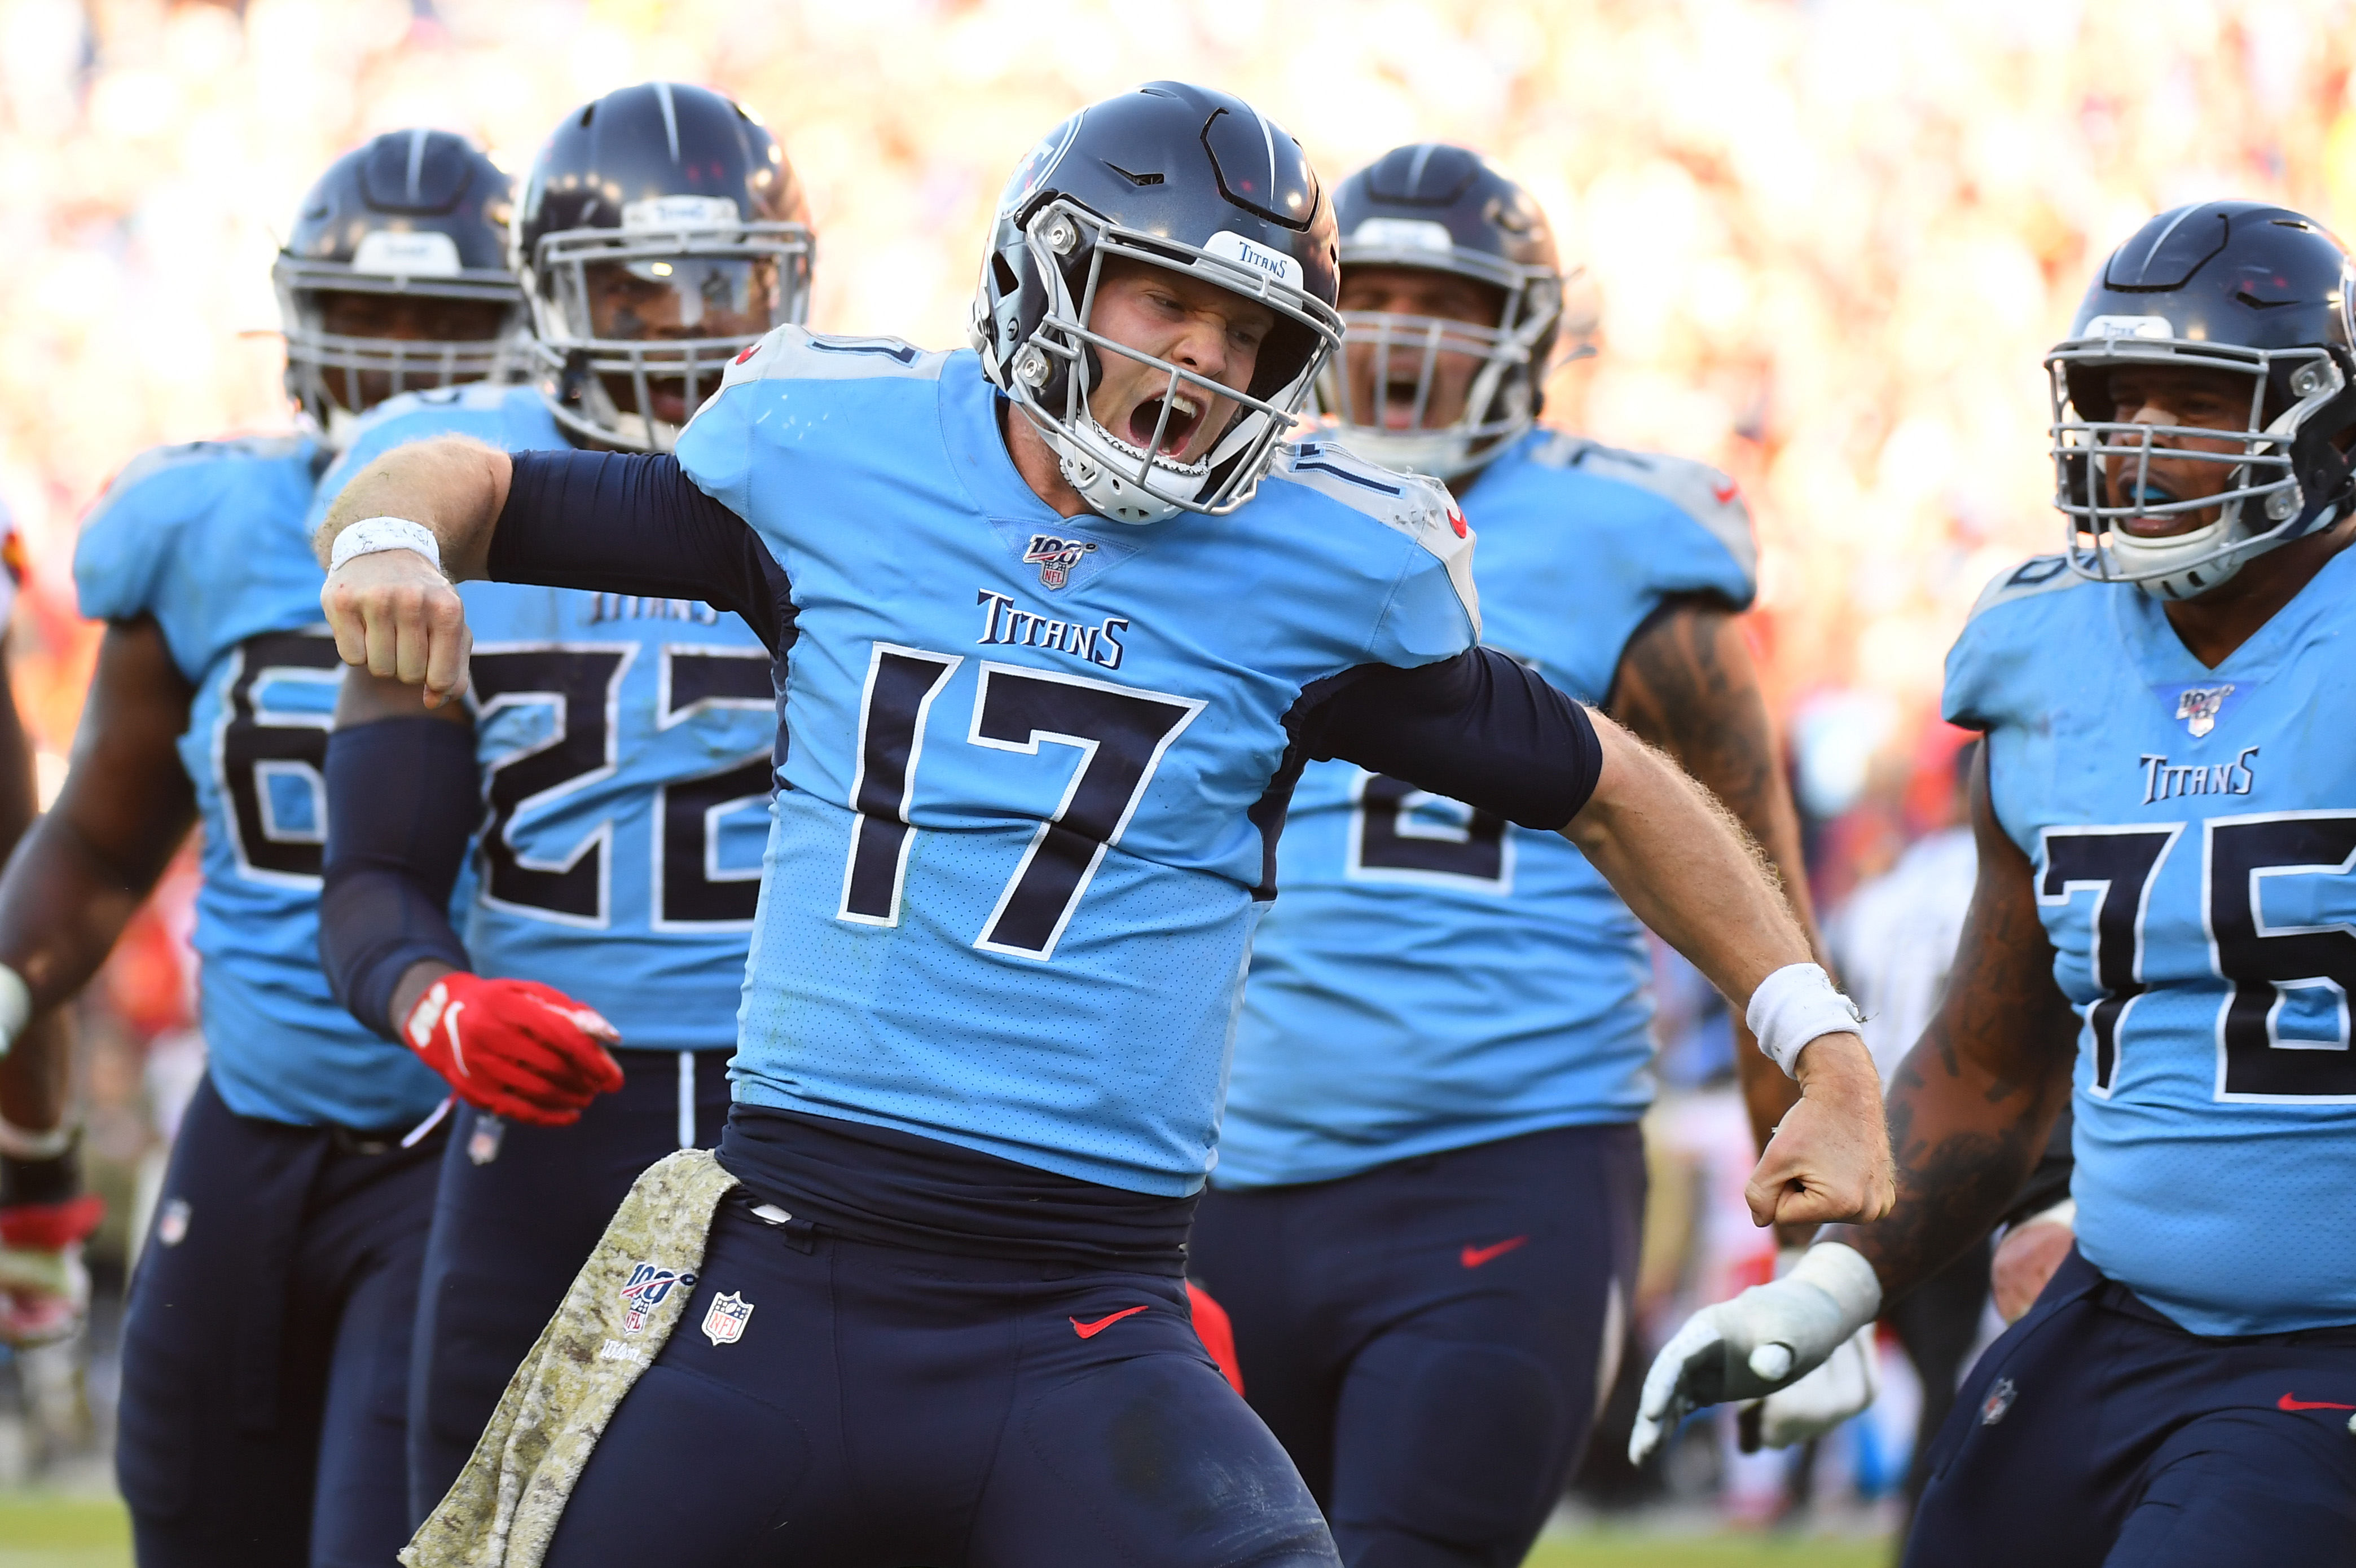 NFL: Kansas City Chiefs at Tennessee Titans